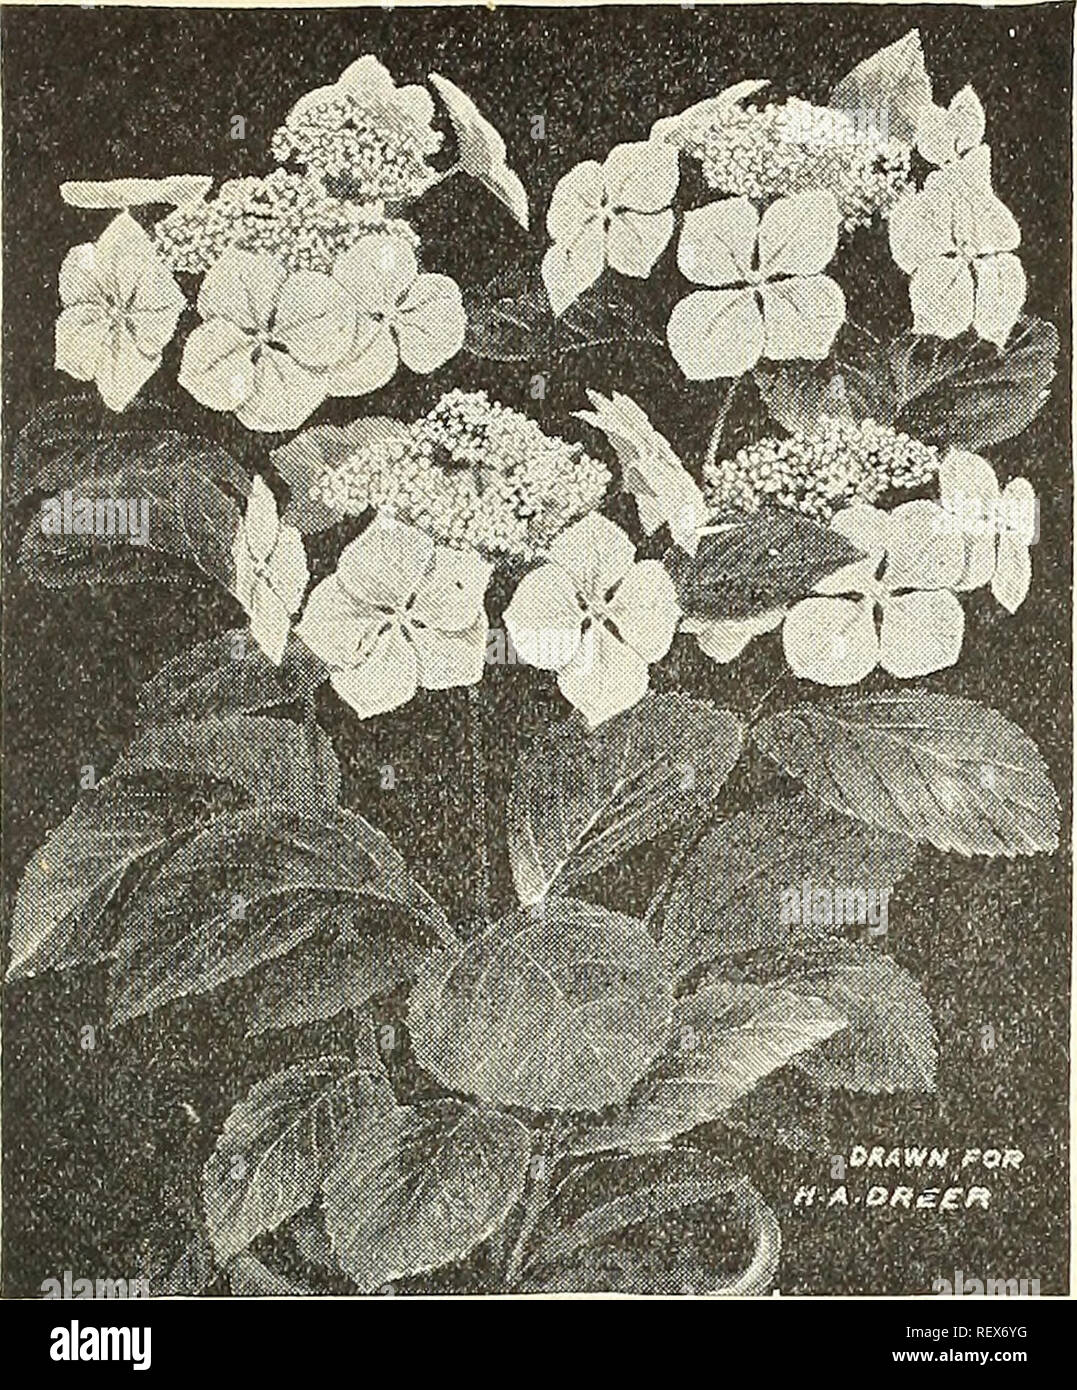 . Dreer's wholesale price list summer edition 1902 July to August : seasonable flower and vegetable seeds, fertilizers, tools, etc., etc. Bulbs (Plants) Catalogs; Flowers Seeds Catalogs; Vegetables Seeds Catalogs; Nurseries (Horticulture) Catalogs. WHOLESALE PRICE LIST. 7. HYDRANGEA HORTENSIS MARIESII. Genista Fragrans. A nice lot of 4-in. pot plants, $2.00 per doz.; $15.00 per 100. Hydrangea Hortensis Mariesii. One of the most distinct and effective varieties yet introduced. It is especially remarkable for the large size and distinct color of its sterile flowers, which are fully 3 inches acro Stock Photo